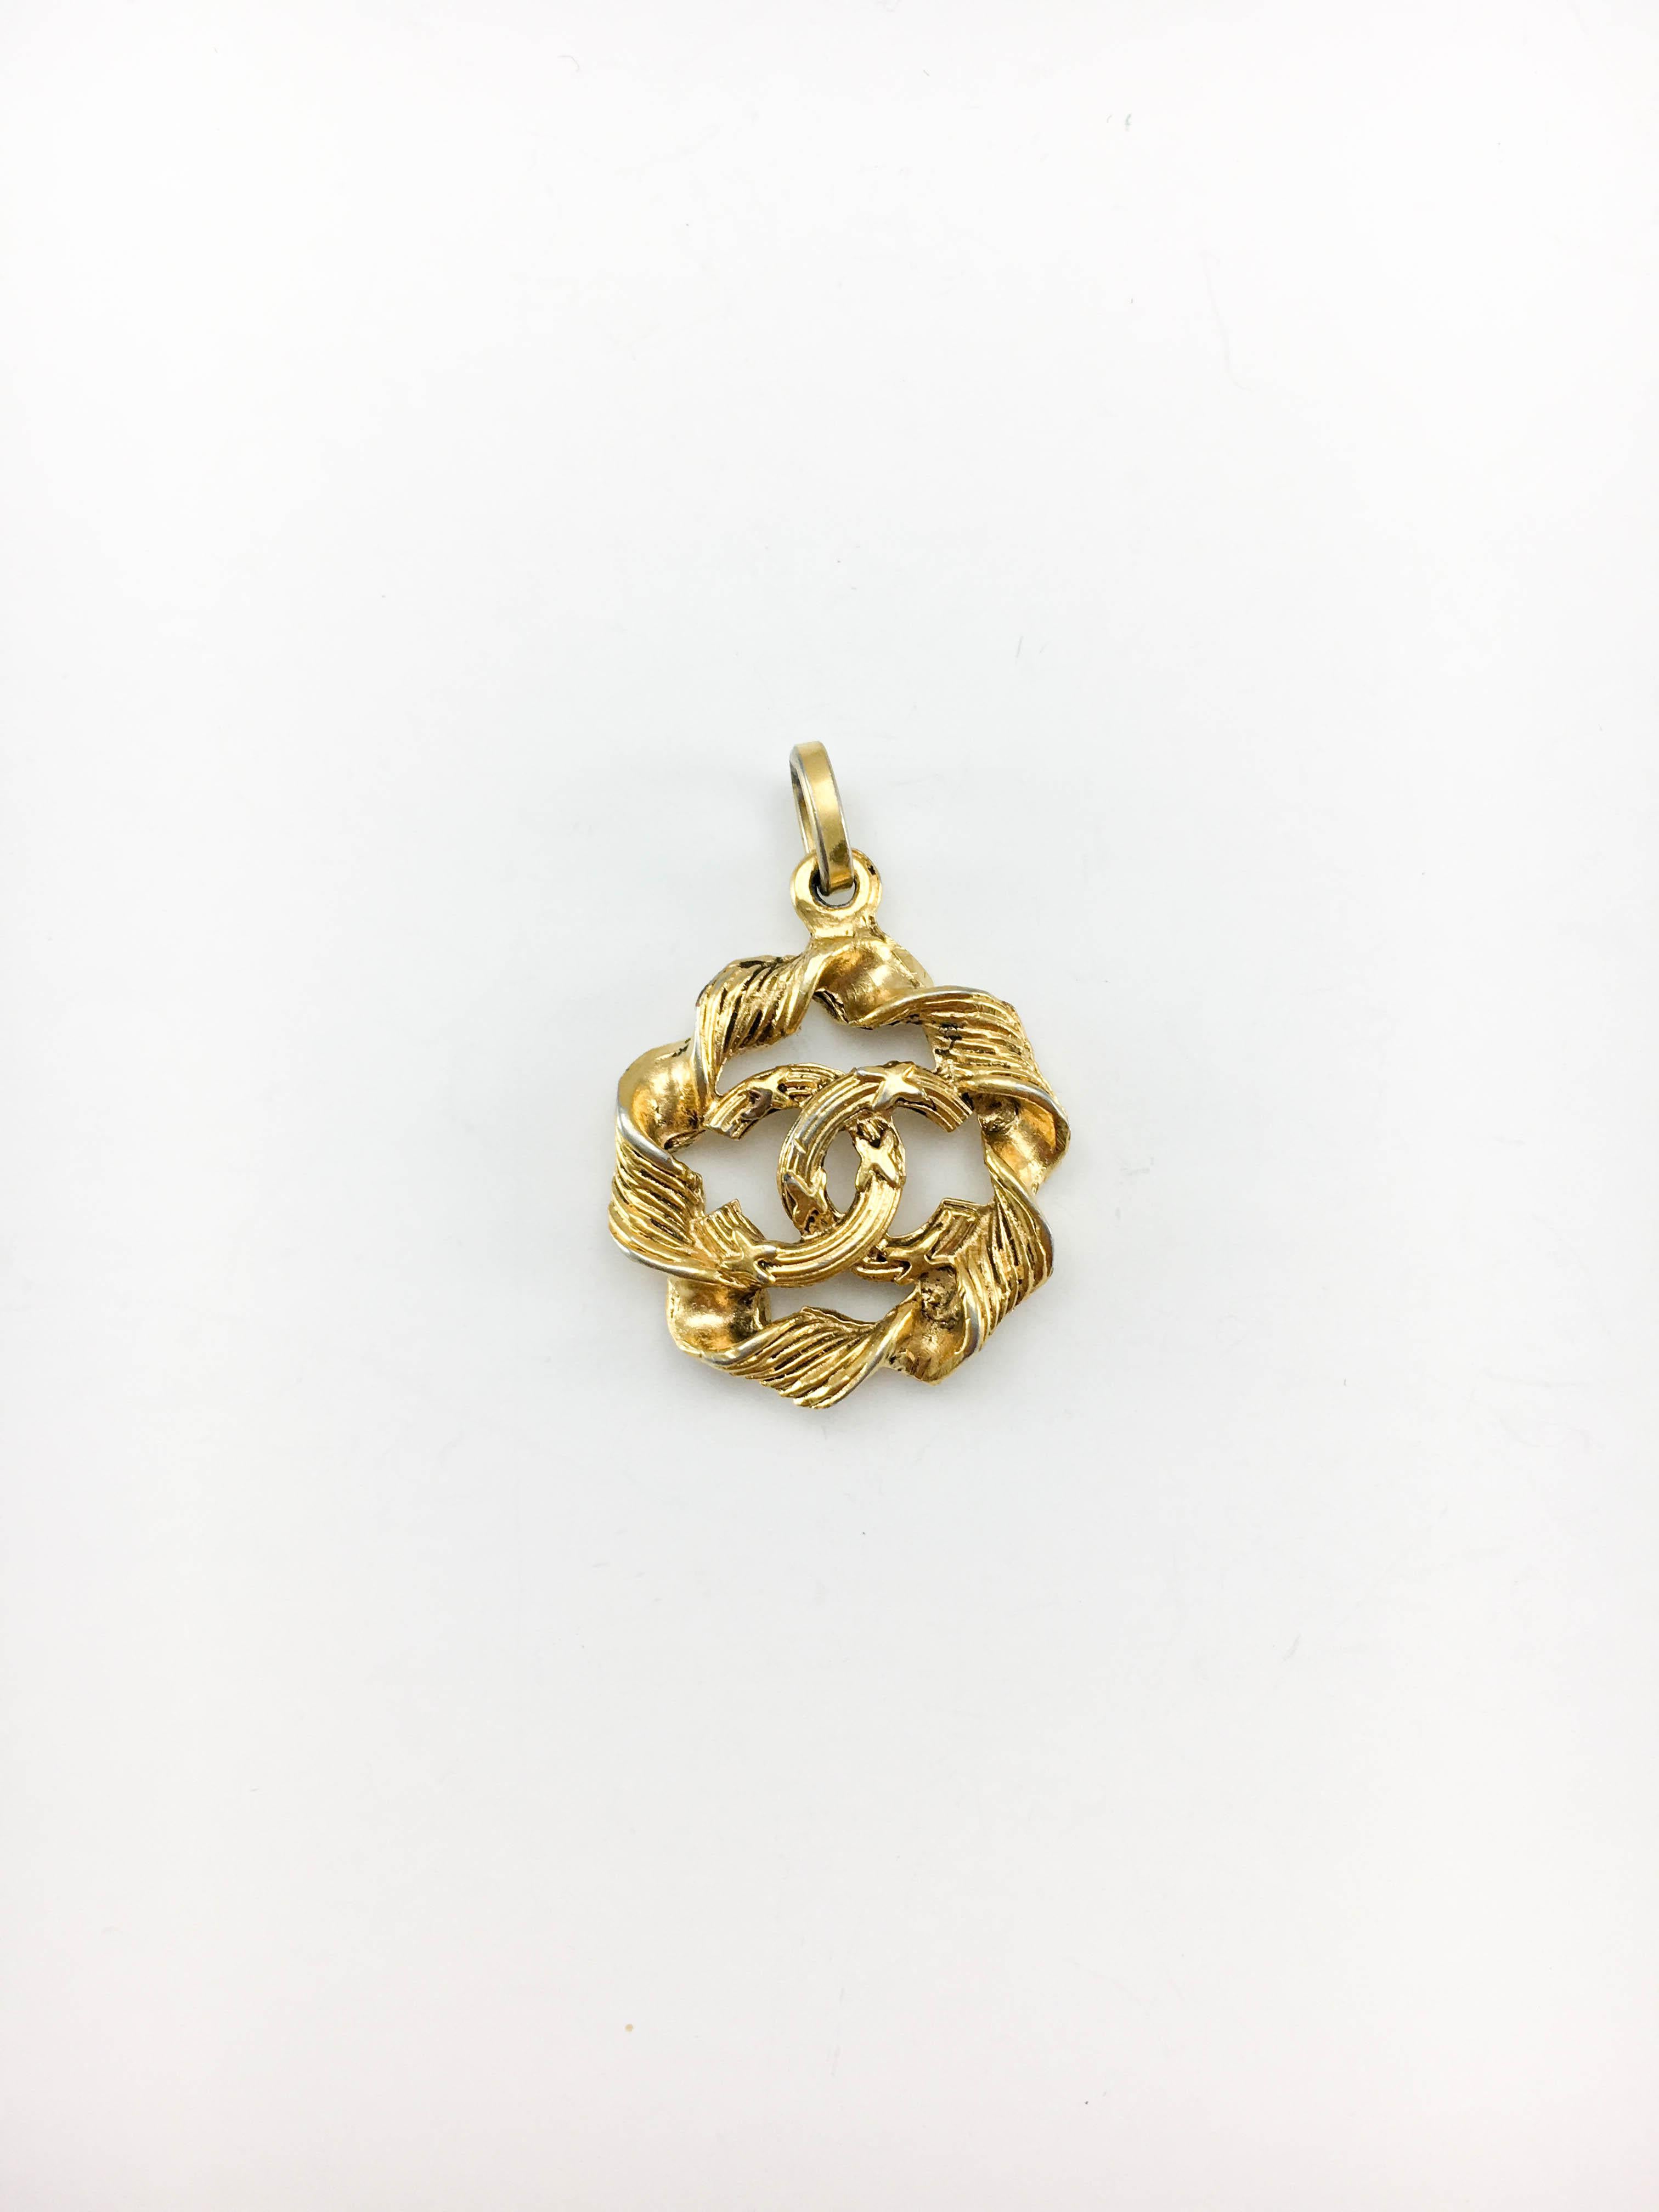 Vintage Chanel Gilt Logo Pendant. This pretty Chanel pendant dates back from the 1970’s. Crafted in gilt base metal, the design features a twisted rim with the iconic ‘CC’ logo in the middle. In very good condition, it show some slight rubbing on